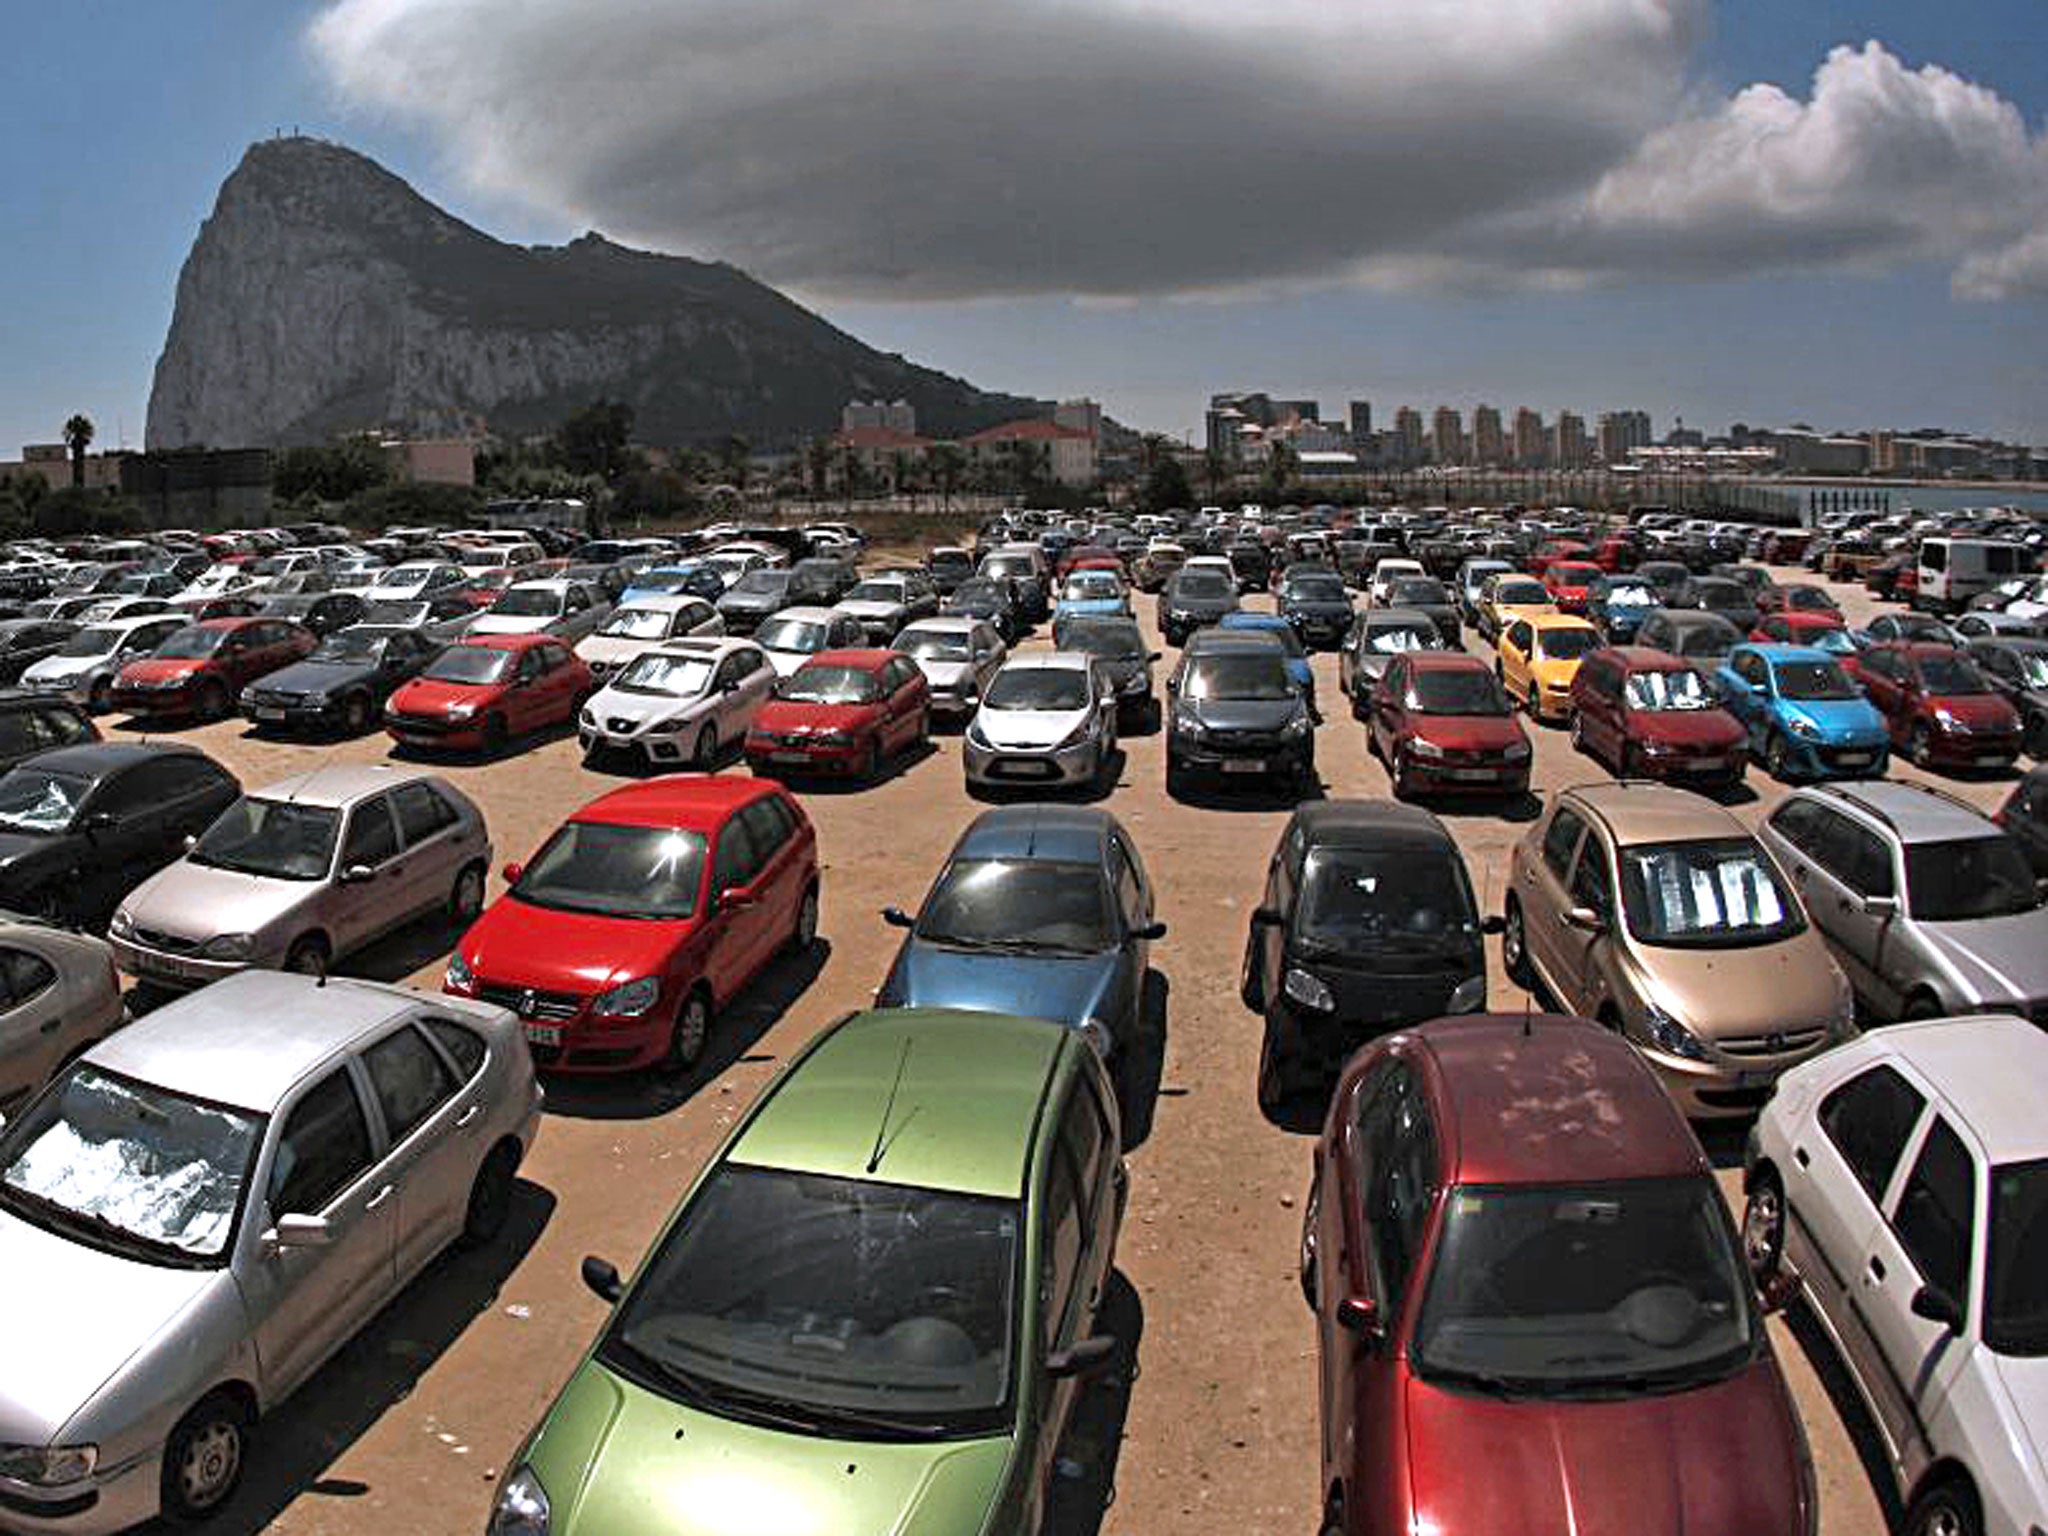 A cloud looms over the Rock of Gibraltar, which is the subject of a dispute over sovereignty between the UK and Spain